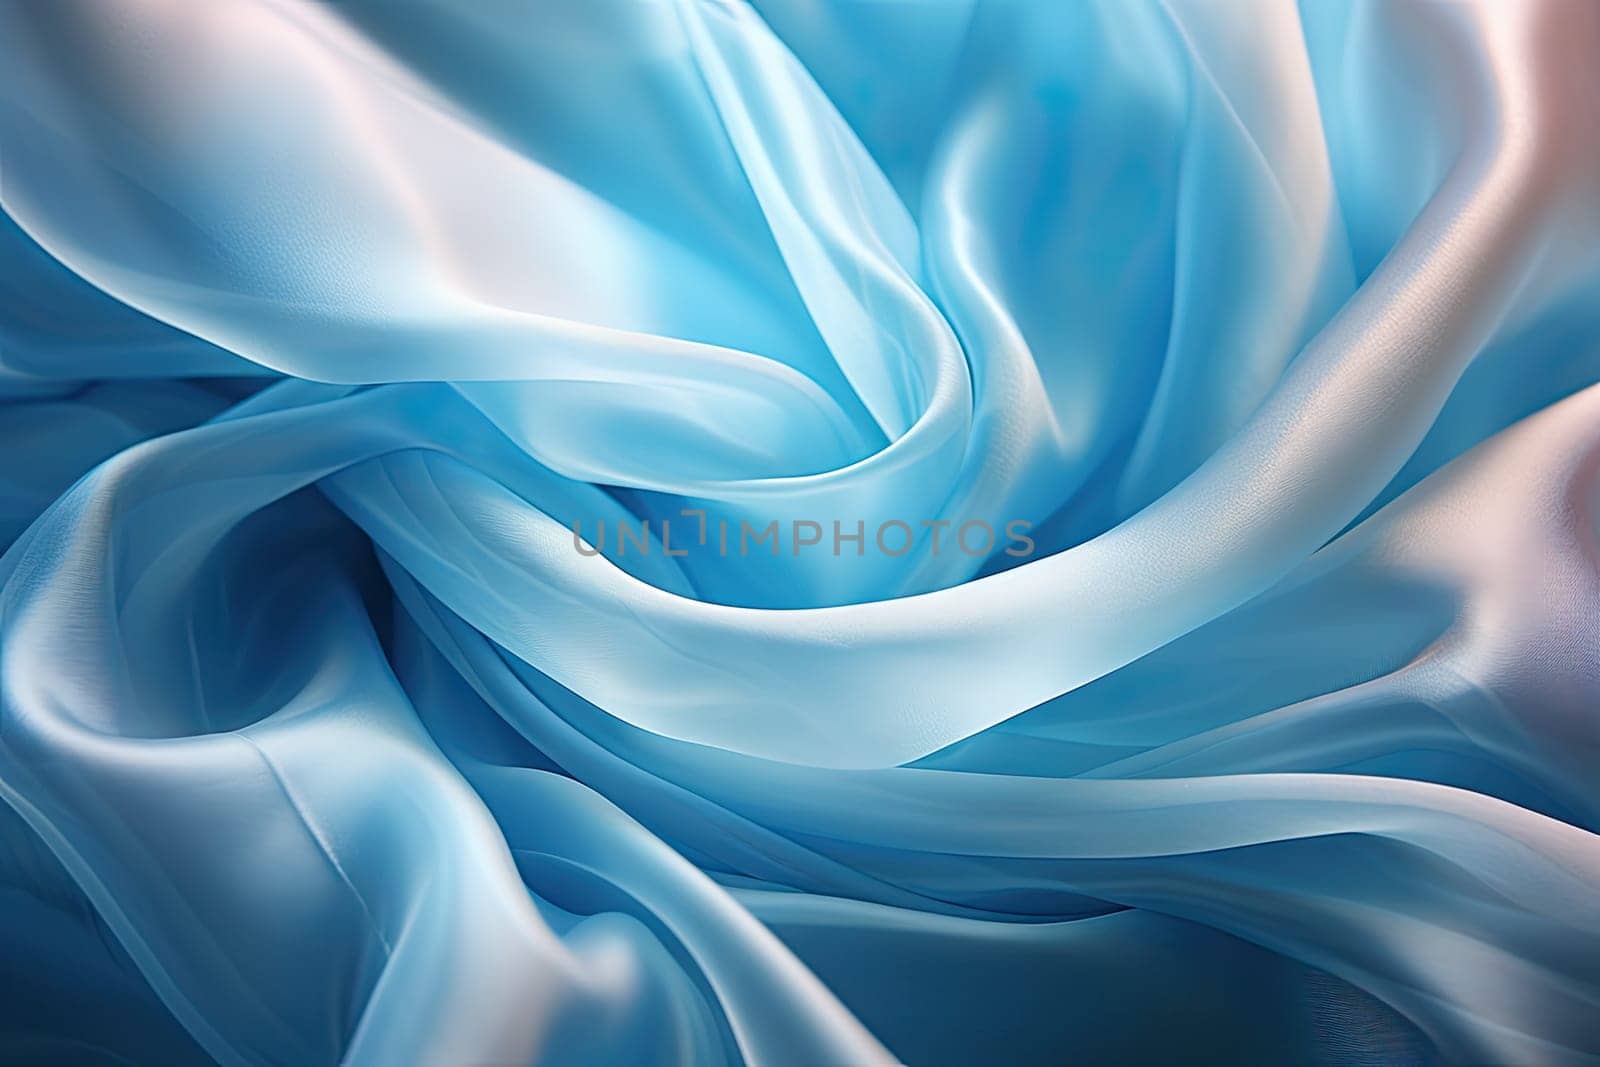 A close up of a blue and white fabric by golibtolibov